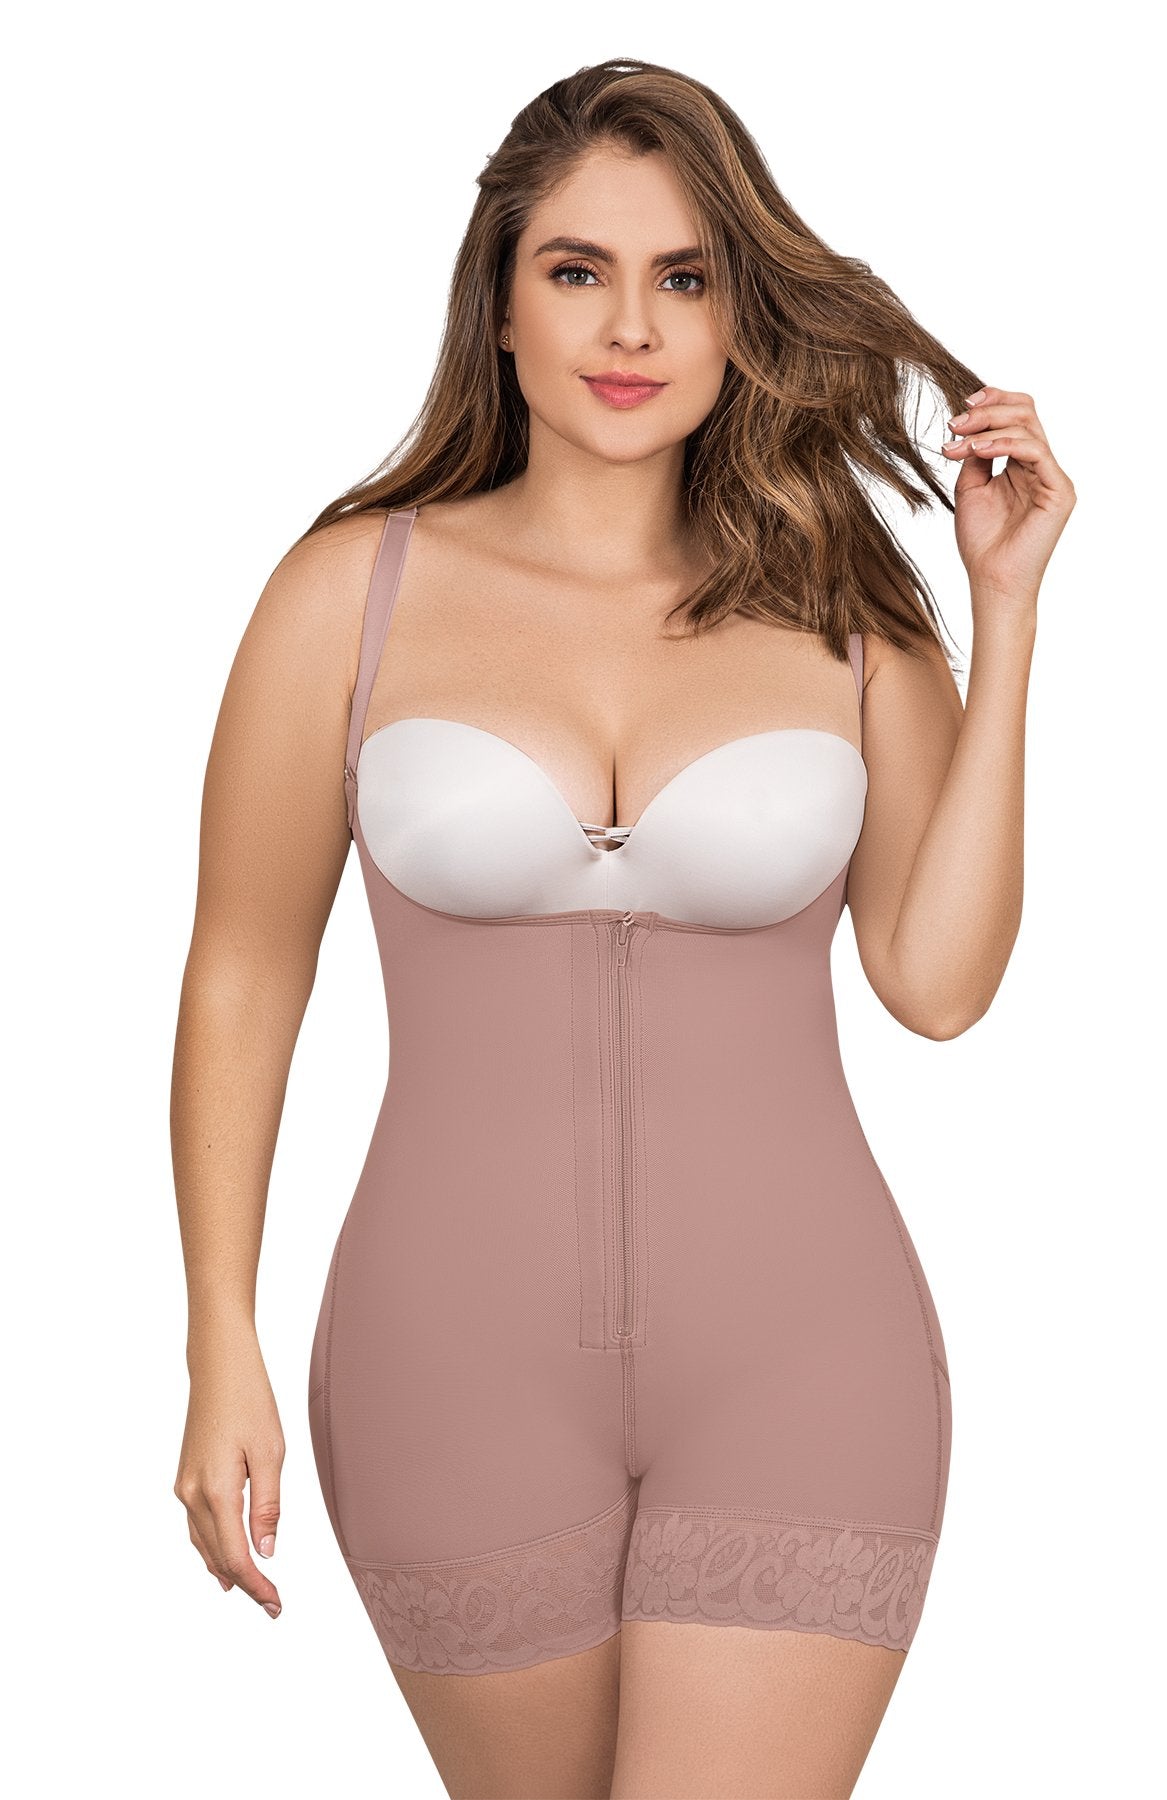 COLD LYCRA BODY SHAPER - Silhouettes and Curves